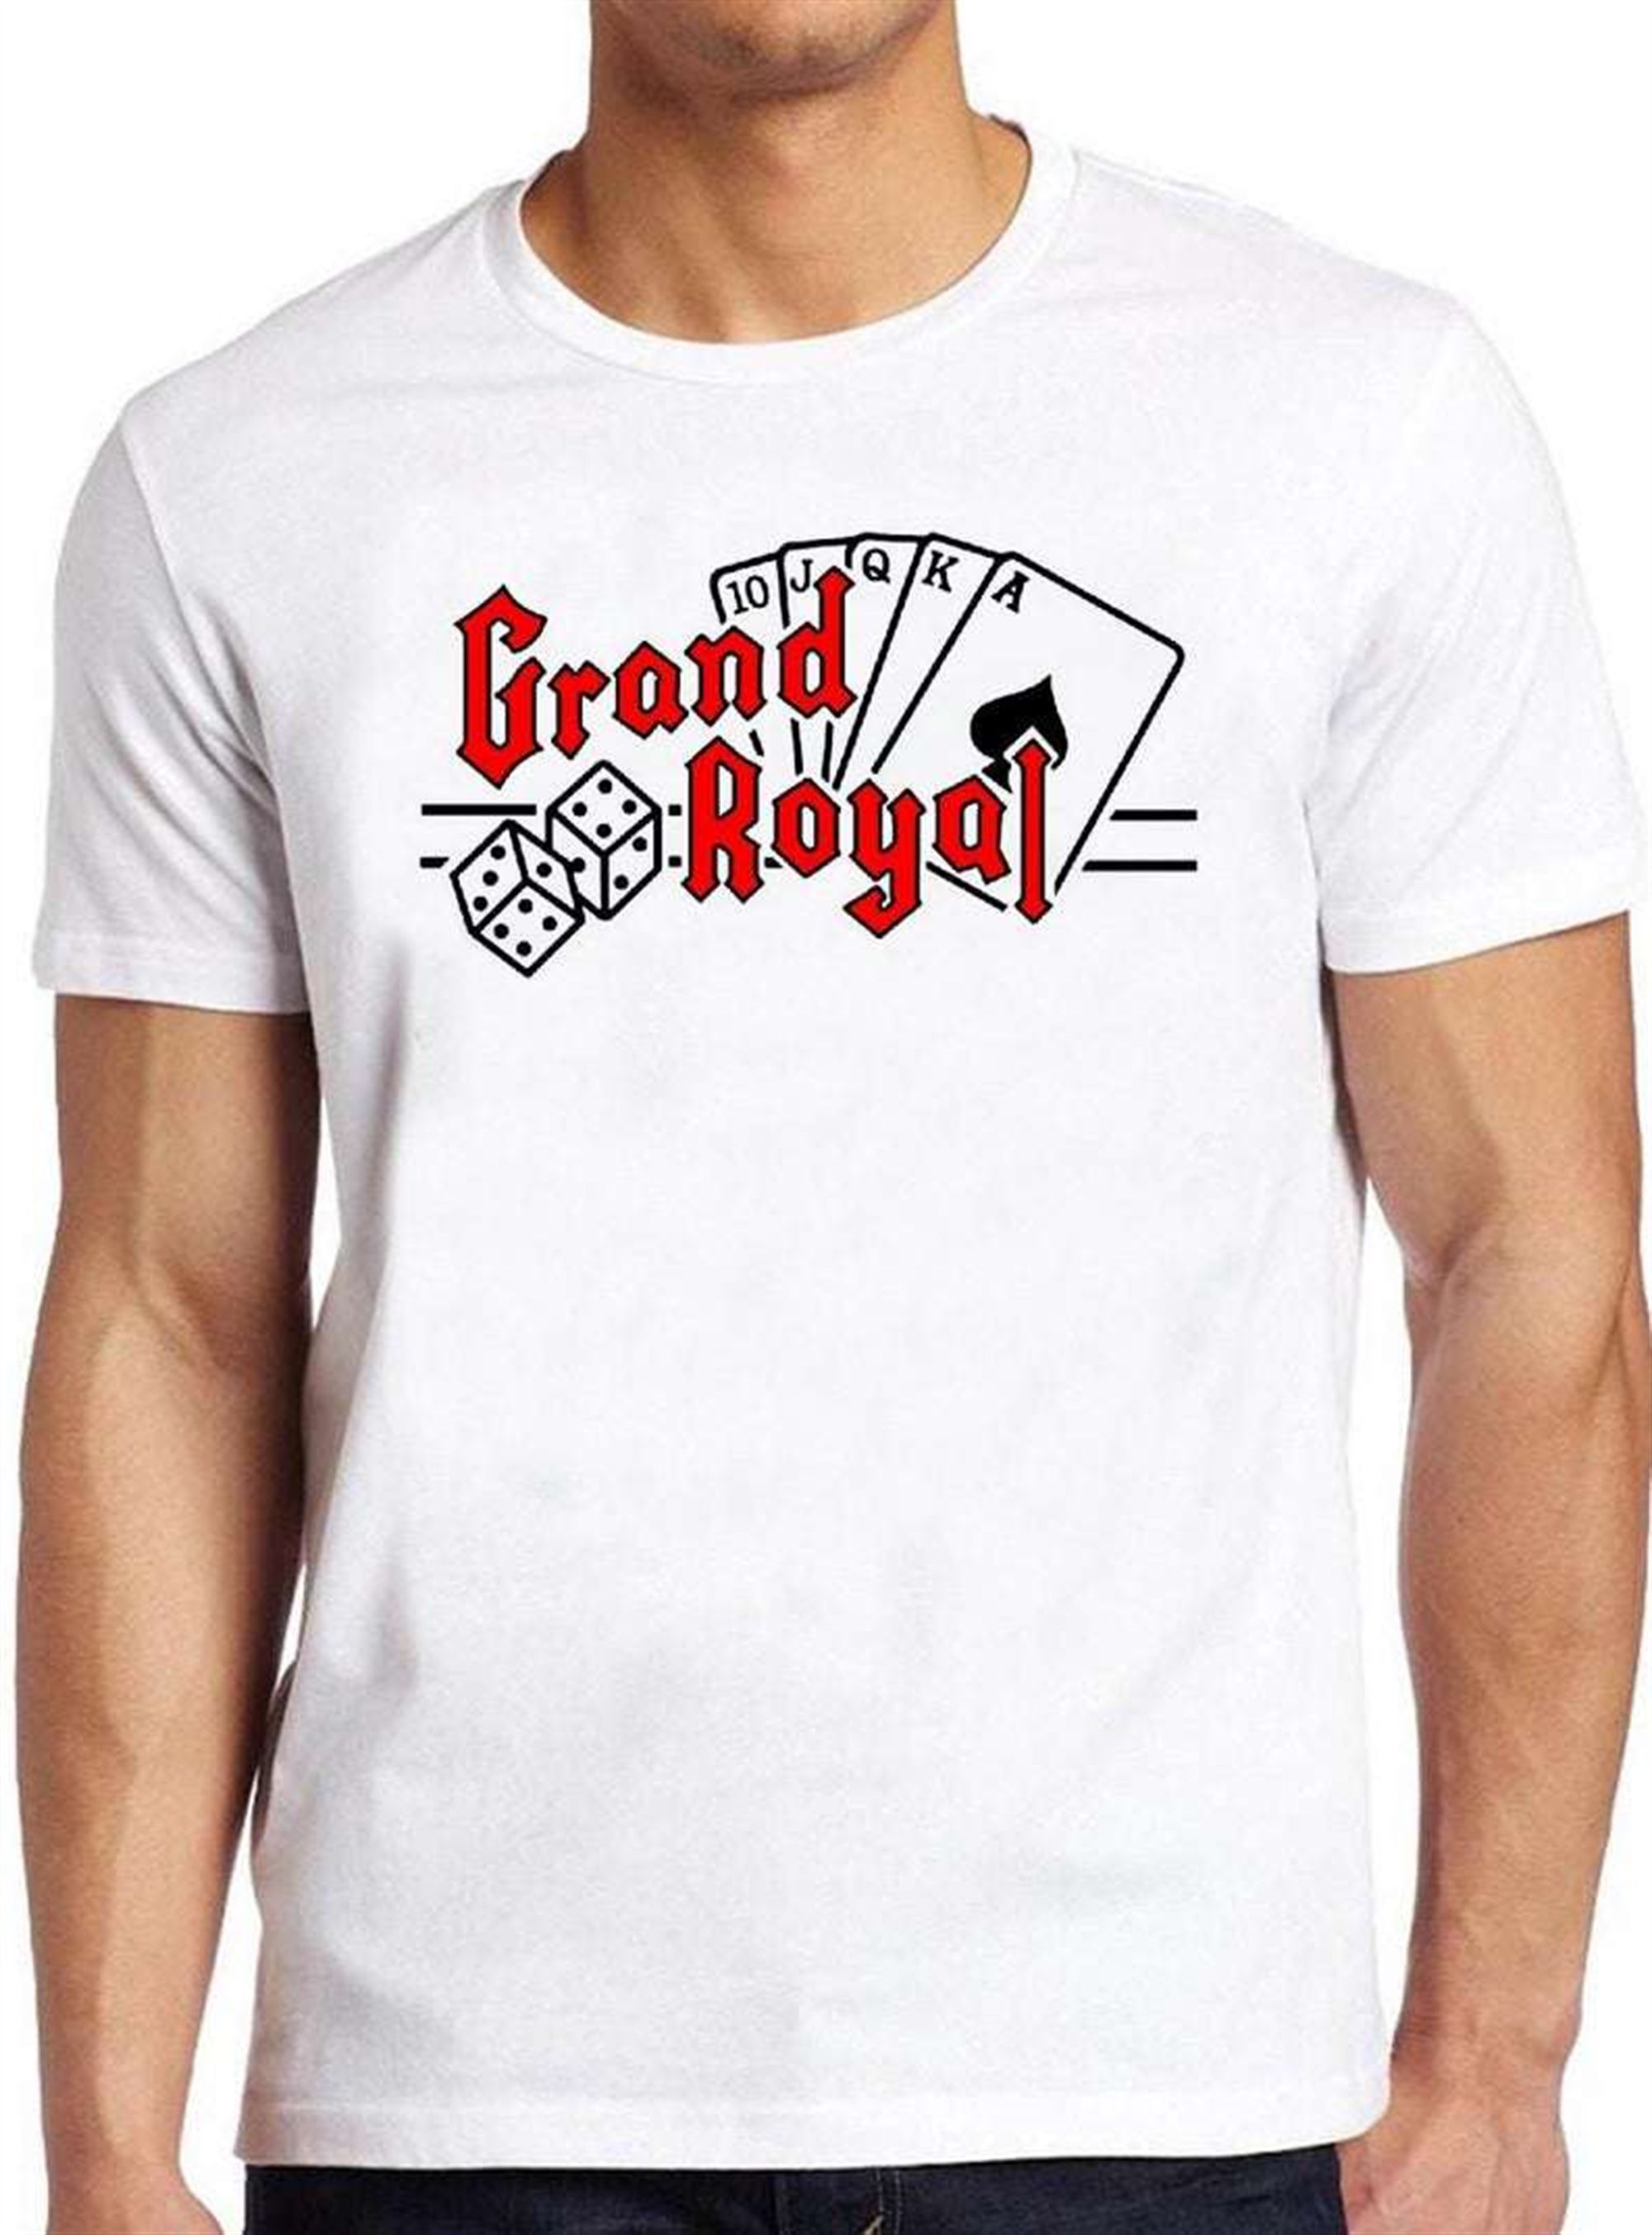 Grand Royal T Shirt Plus Size Up To 5xl